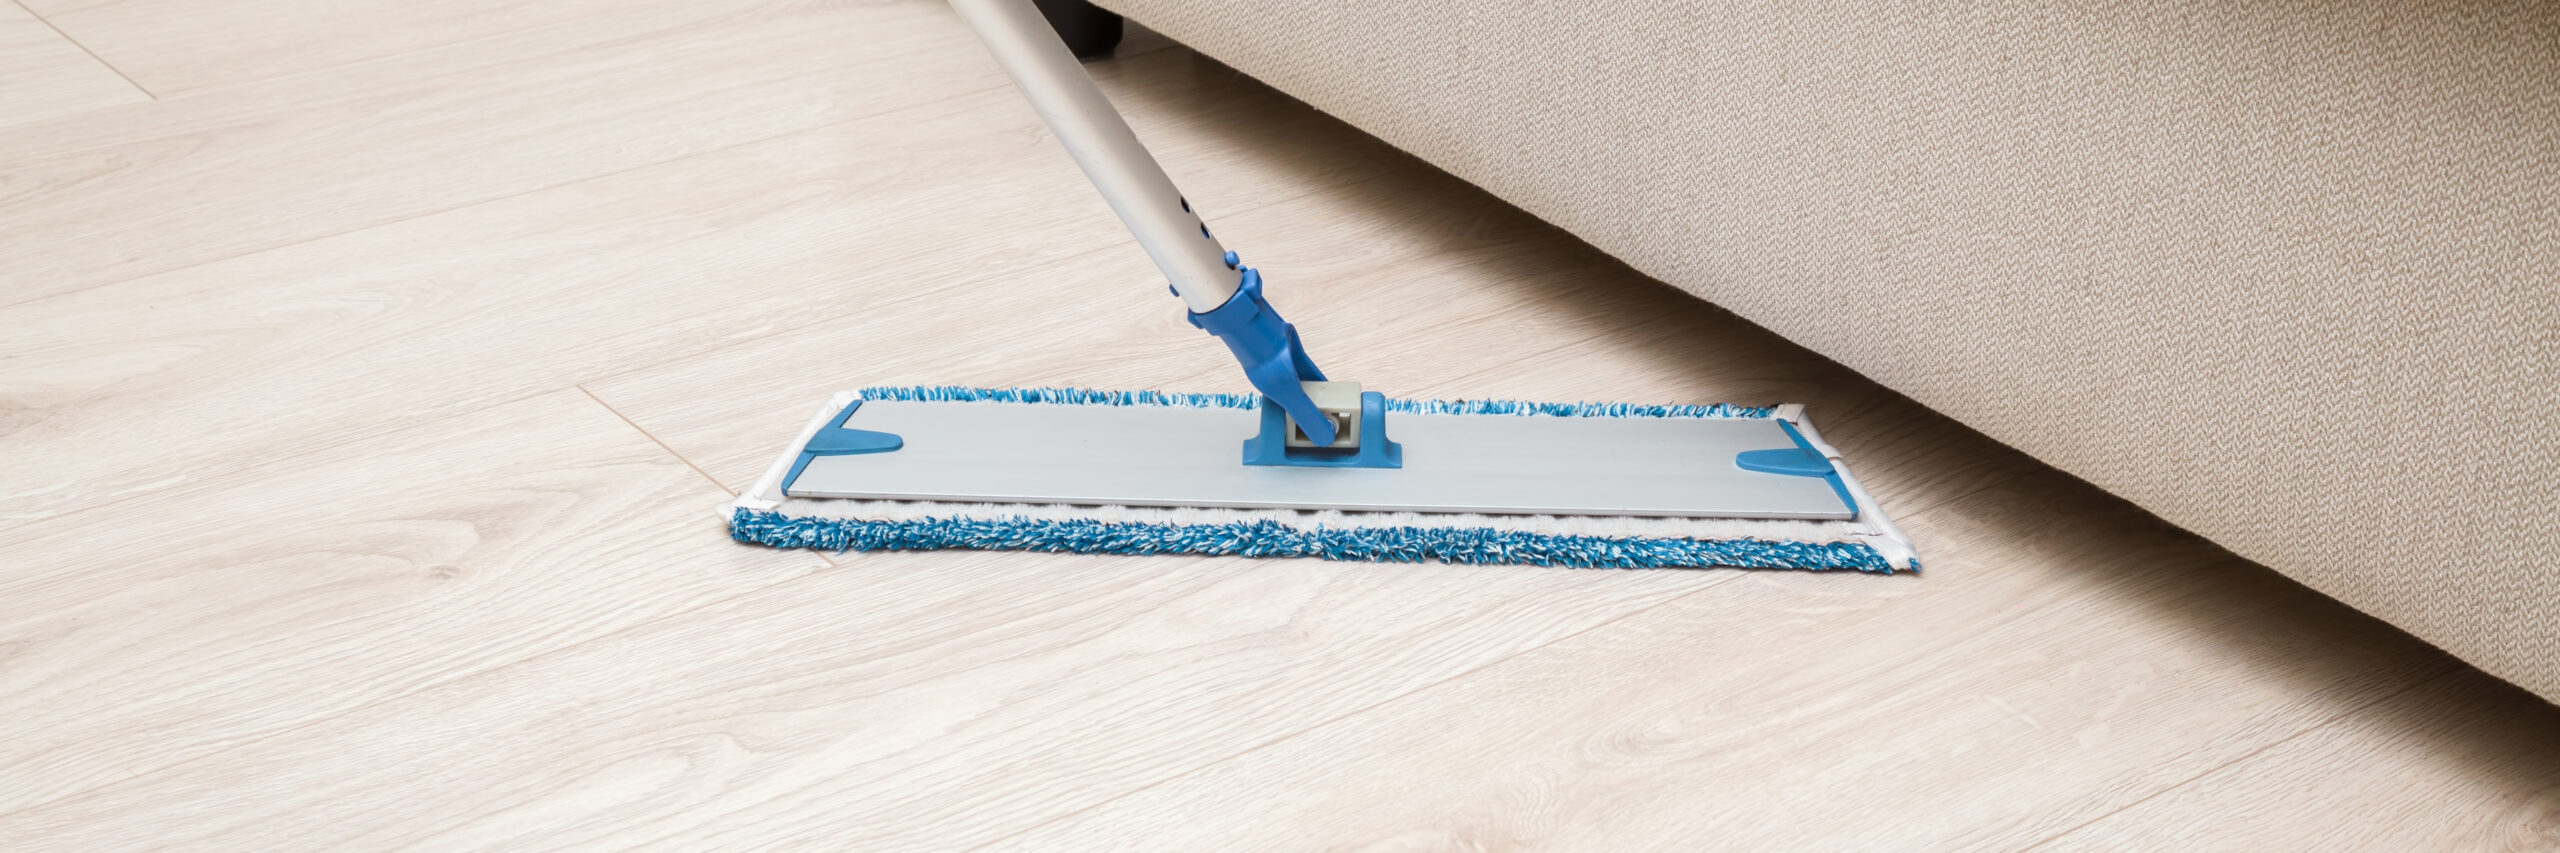 4 Ways NOT To Clean Your Wood Floors - RW Supply + Design